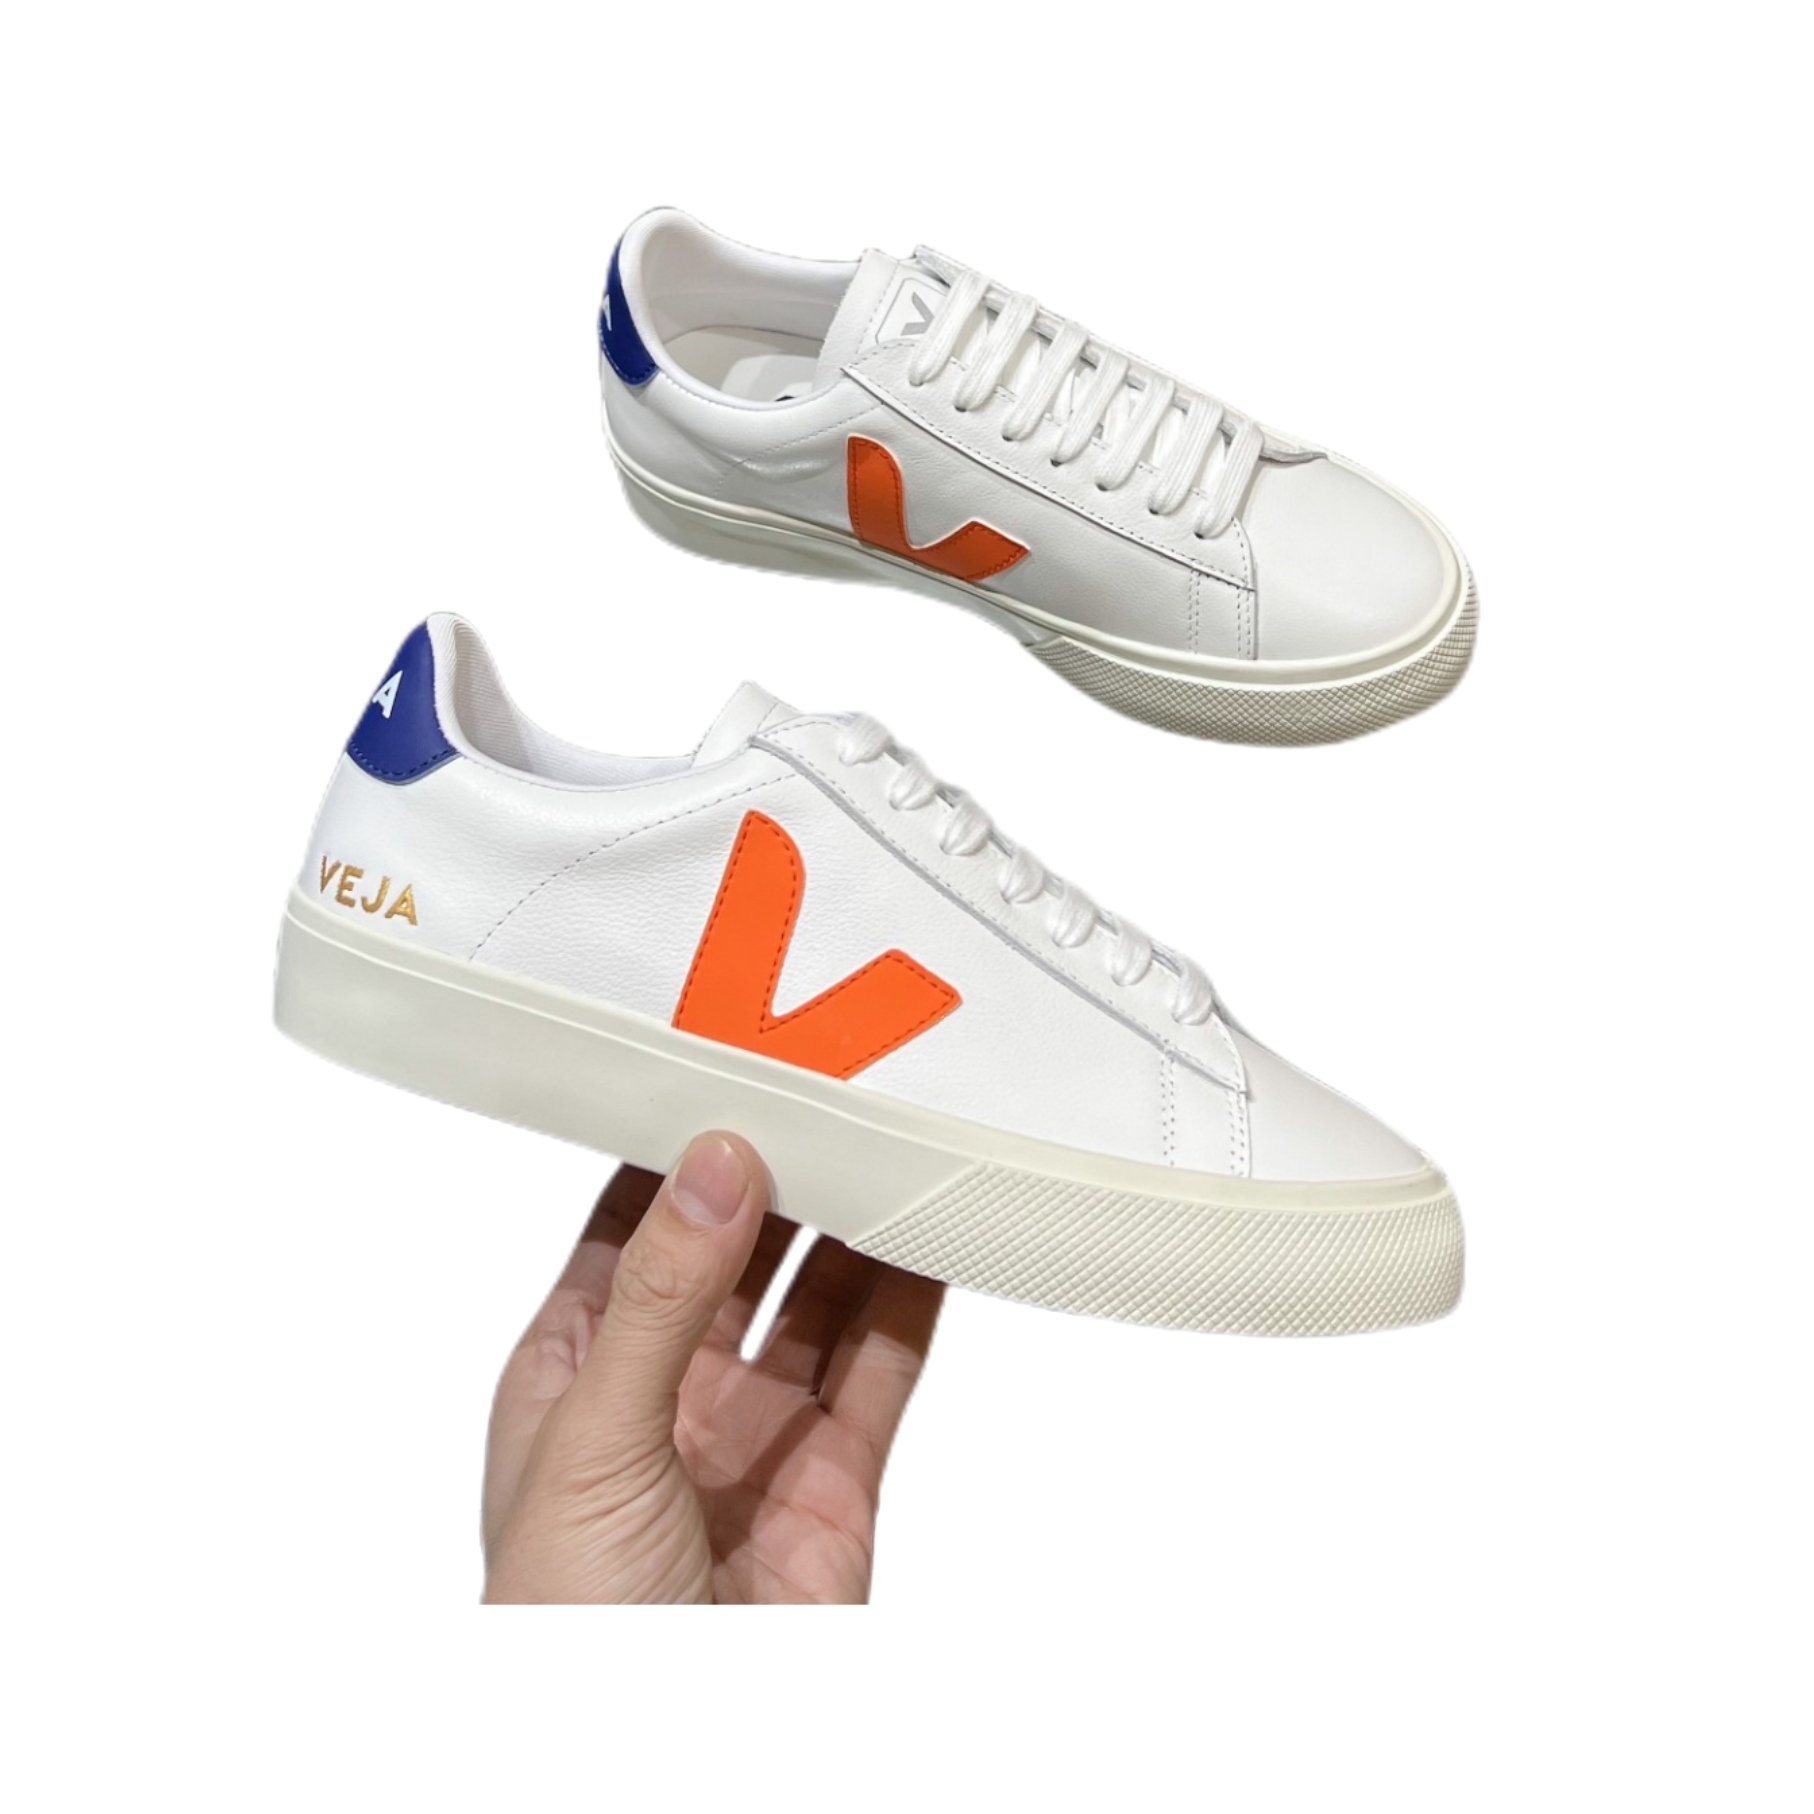 

Designers Men Veja Casual Shoes Summer Women White California Sneaker Calfskin Genuine Leather Trainers Fashion Lace Up Outdoor High Top Va Word Sneakers Size 35-46